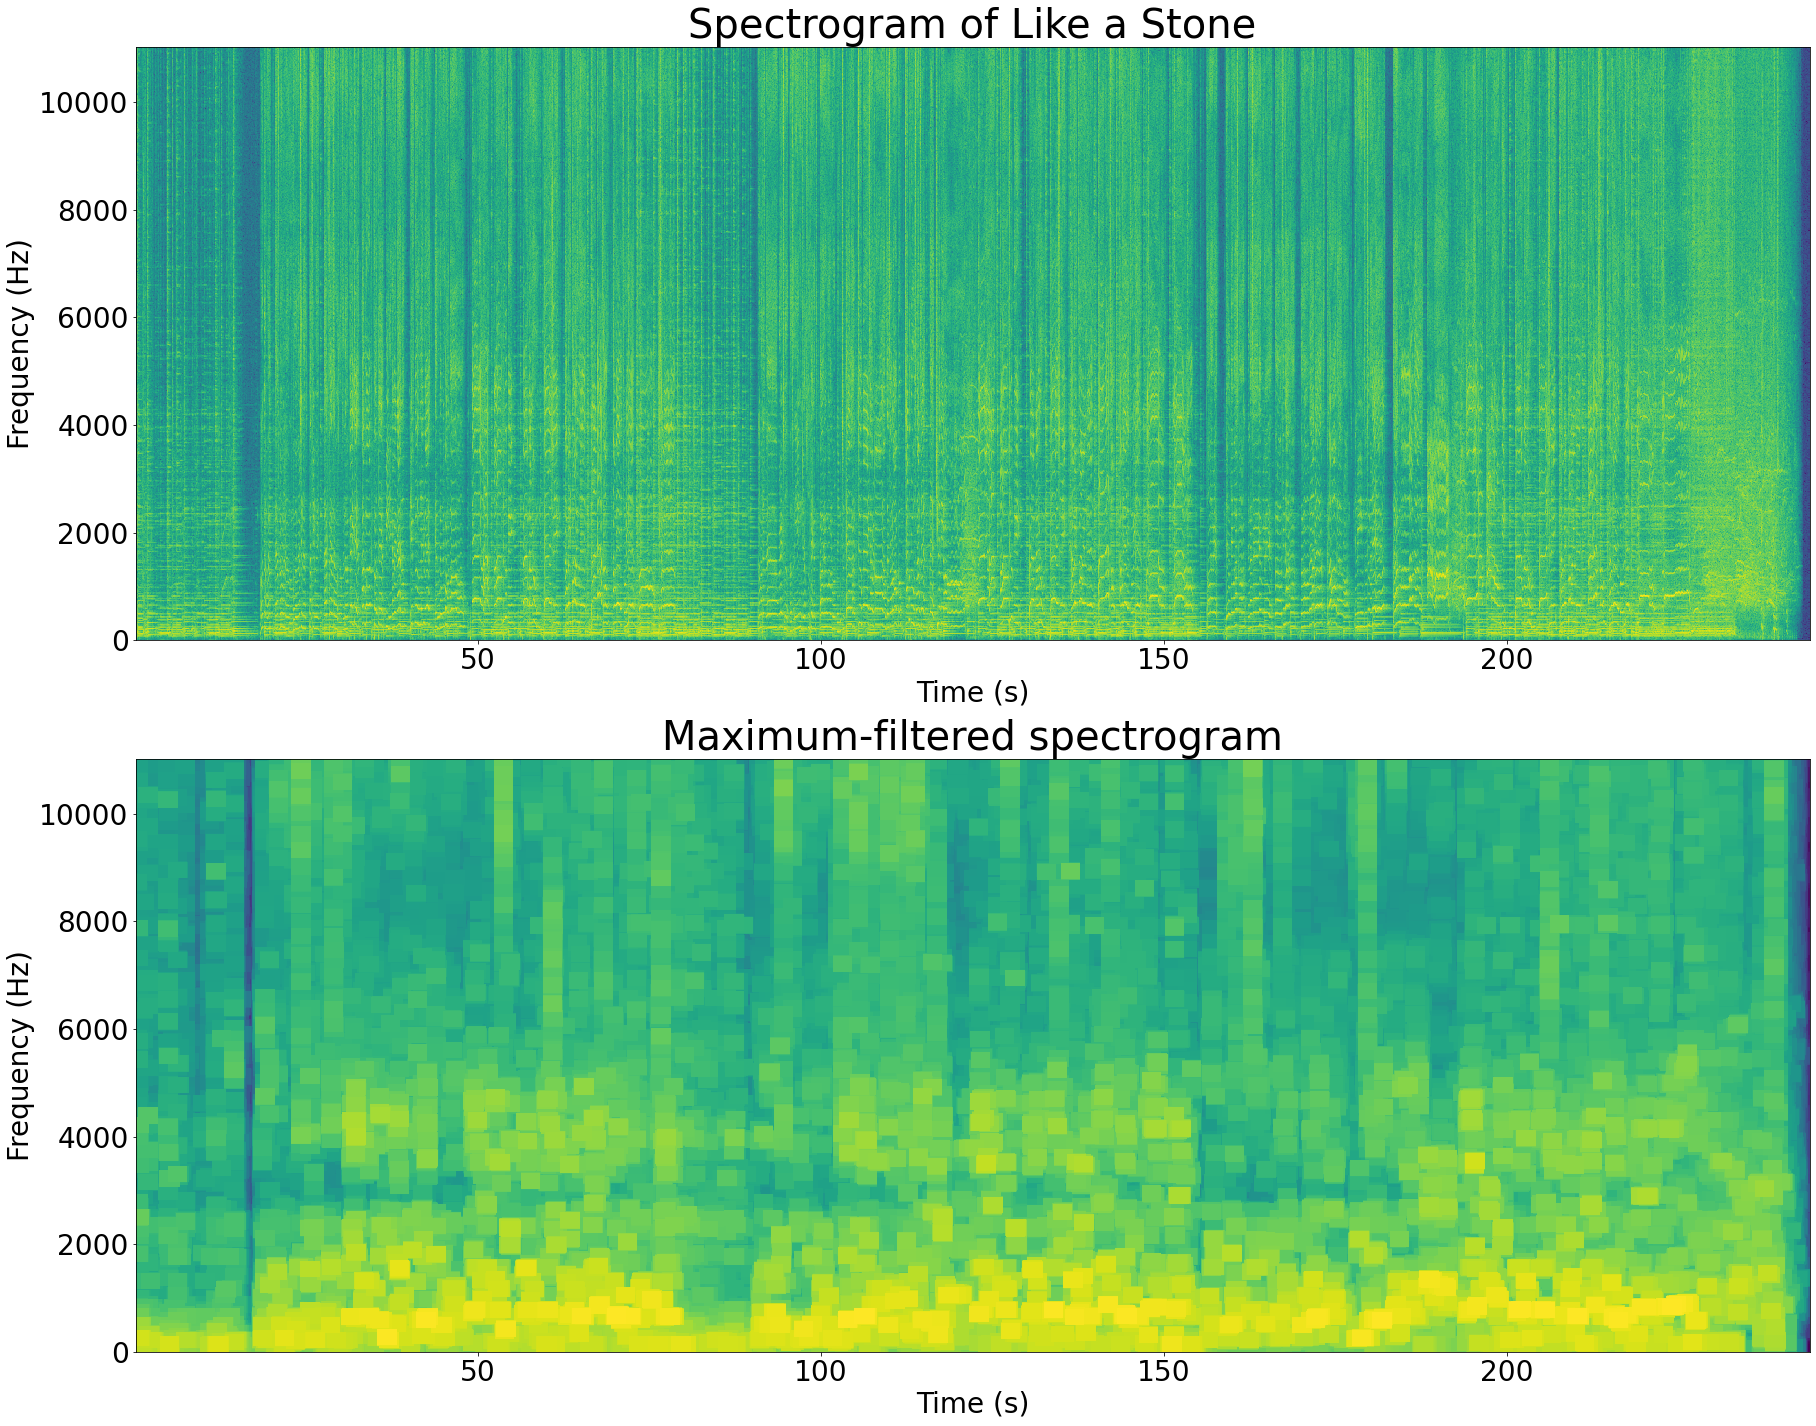 Spectrogram and maximum-filtered spectrogram of Like a Stone